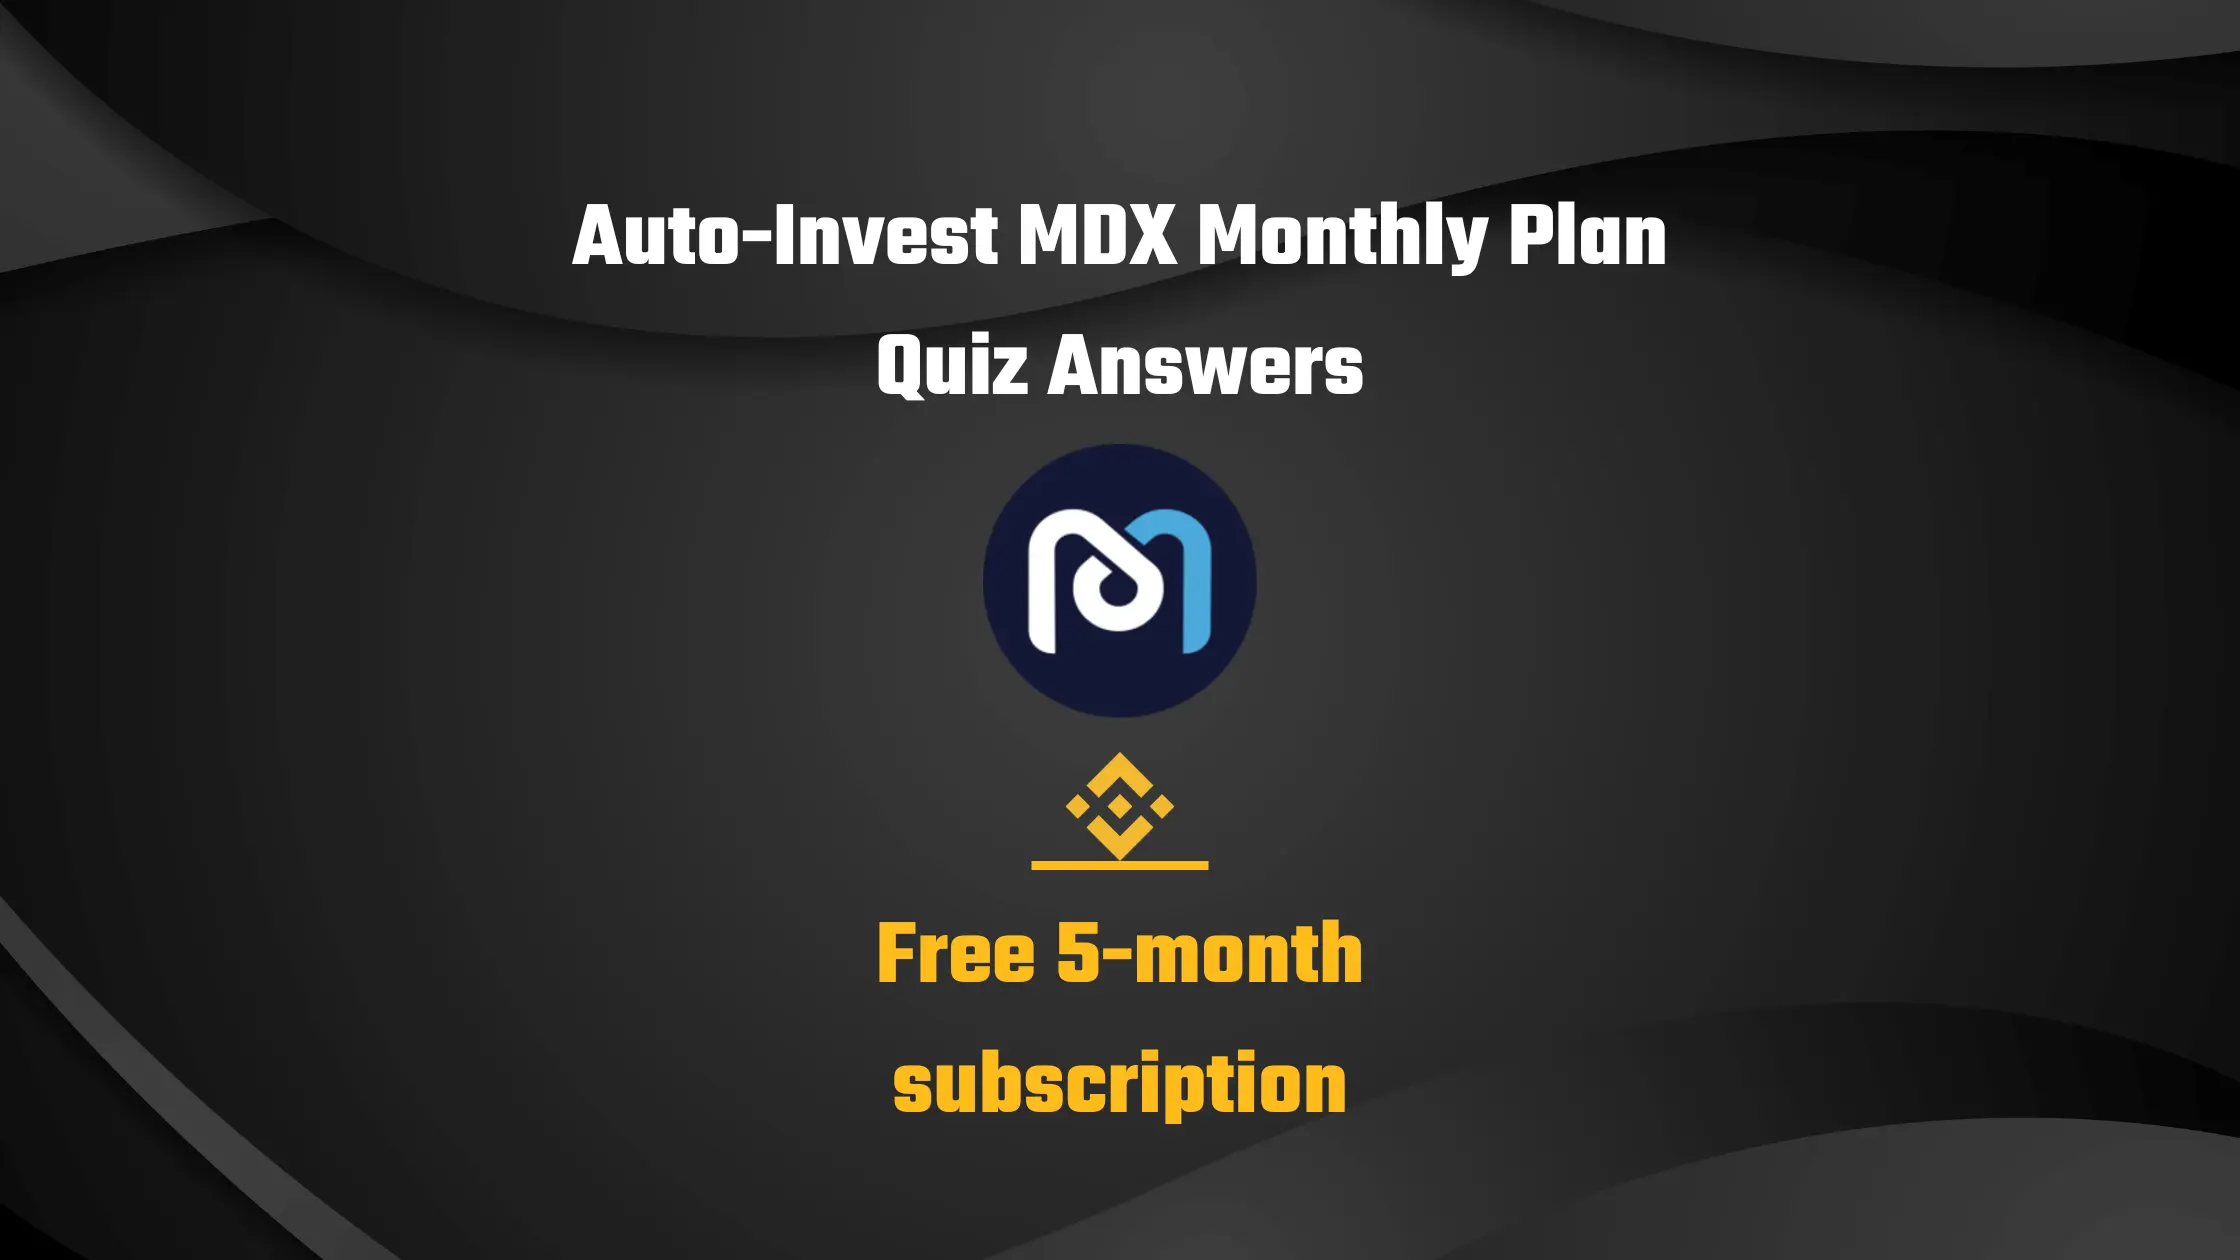 Matic dual investment #binance quiz #answers 